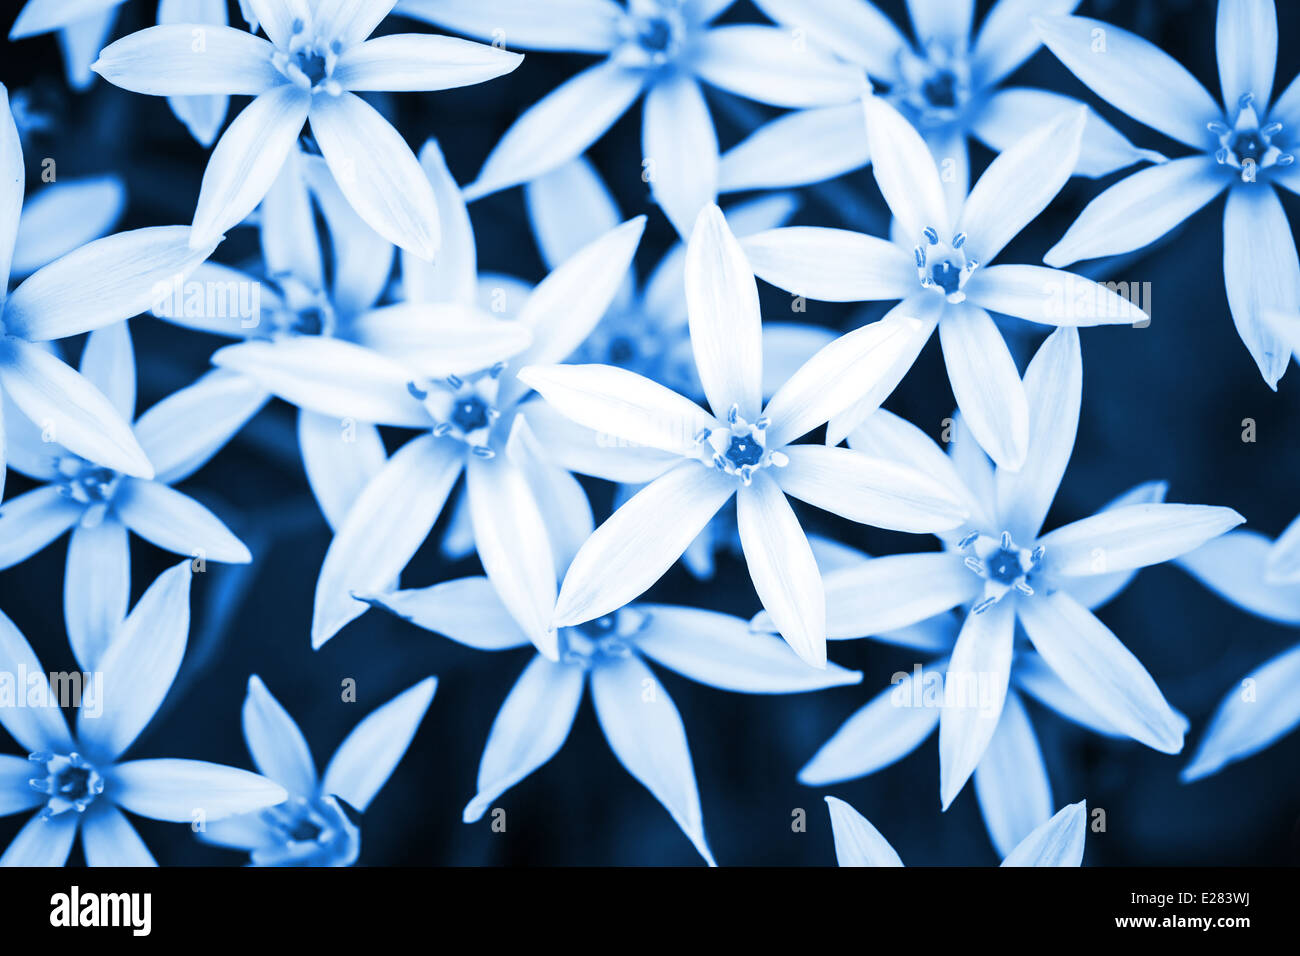 Abstract blue nature background with small white flowers Stock Photo